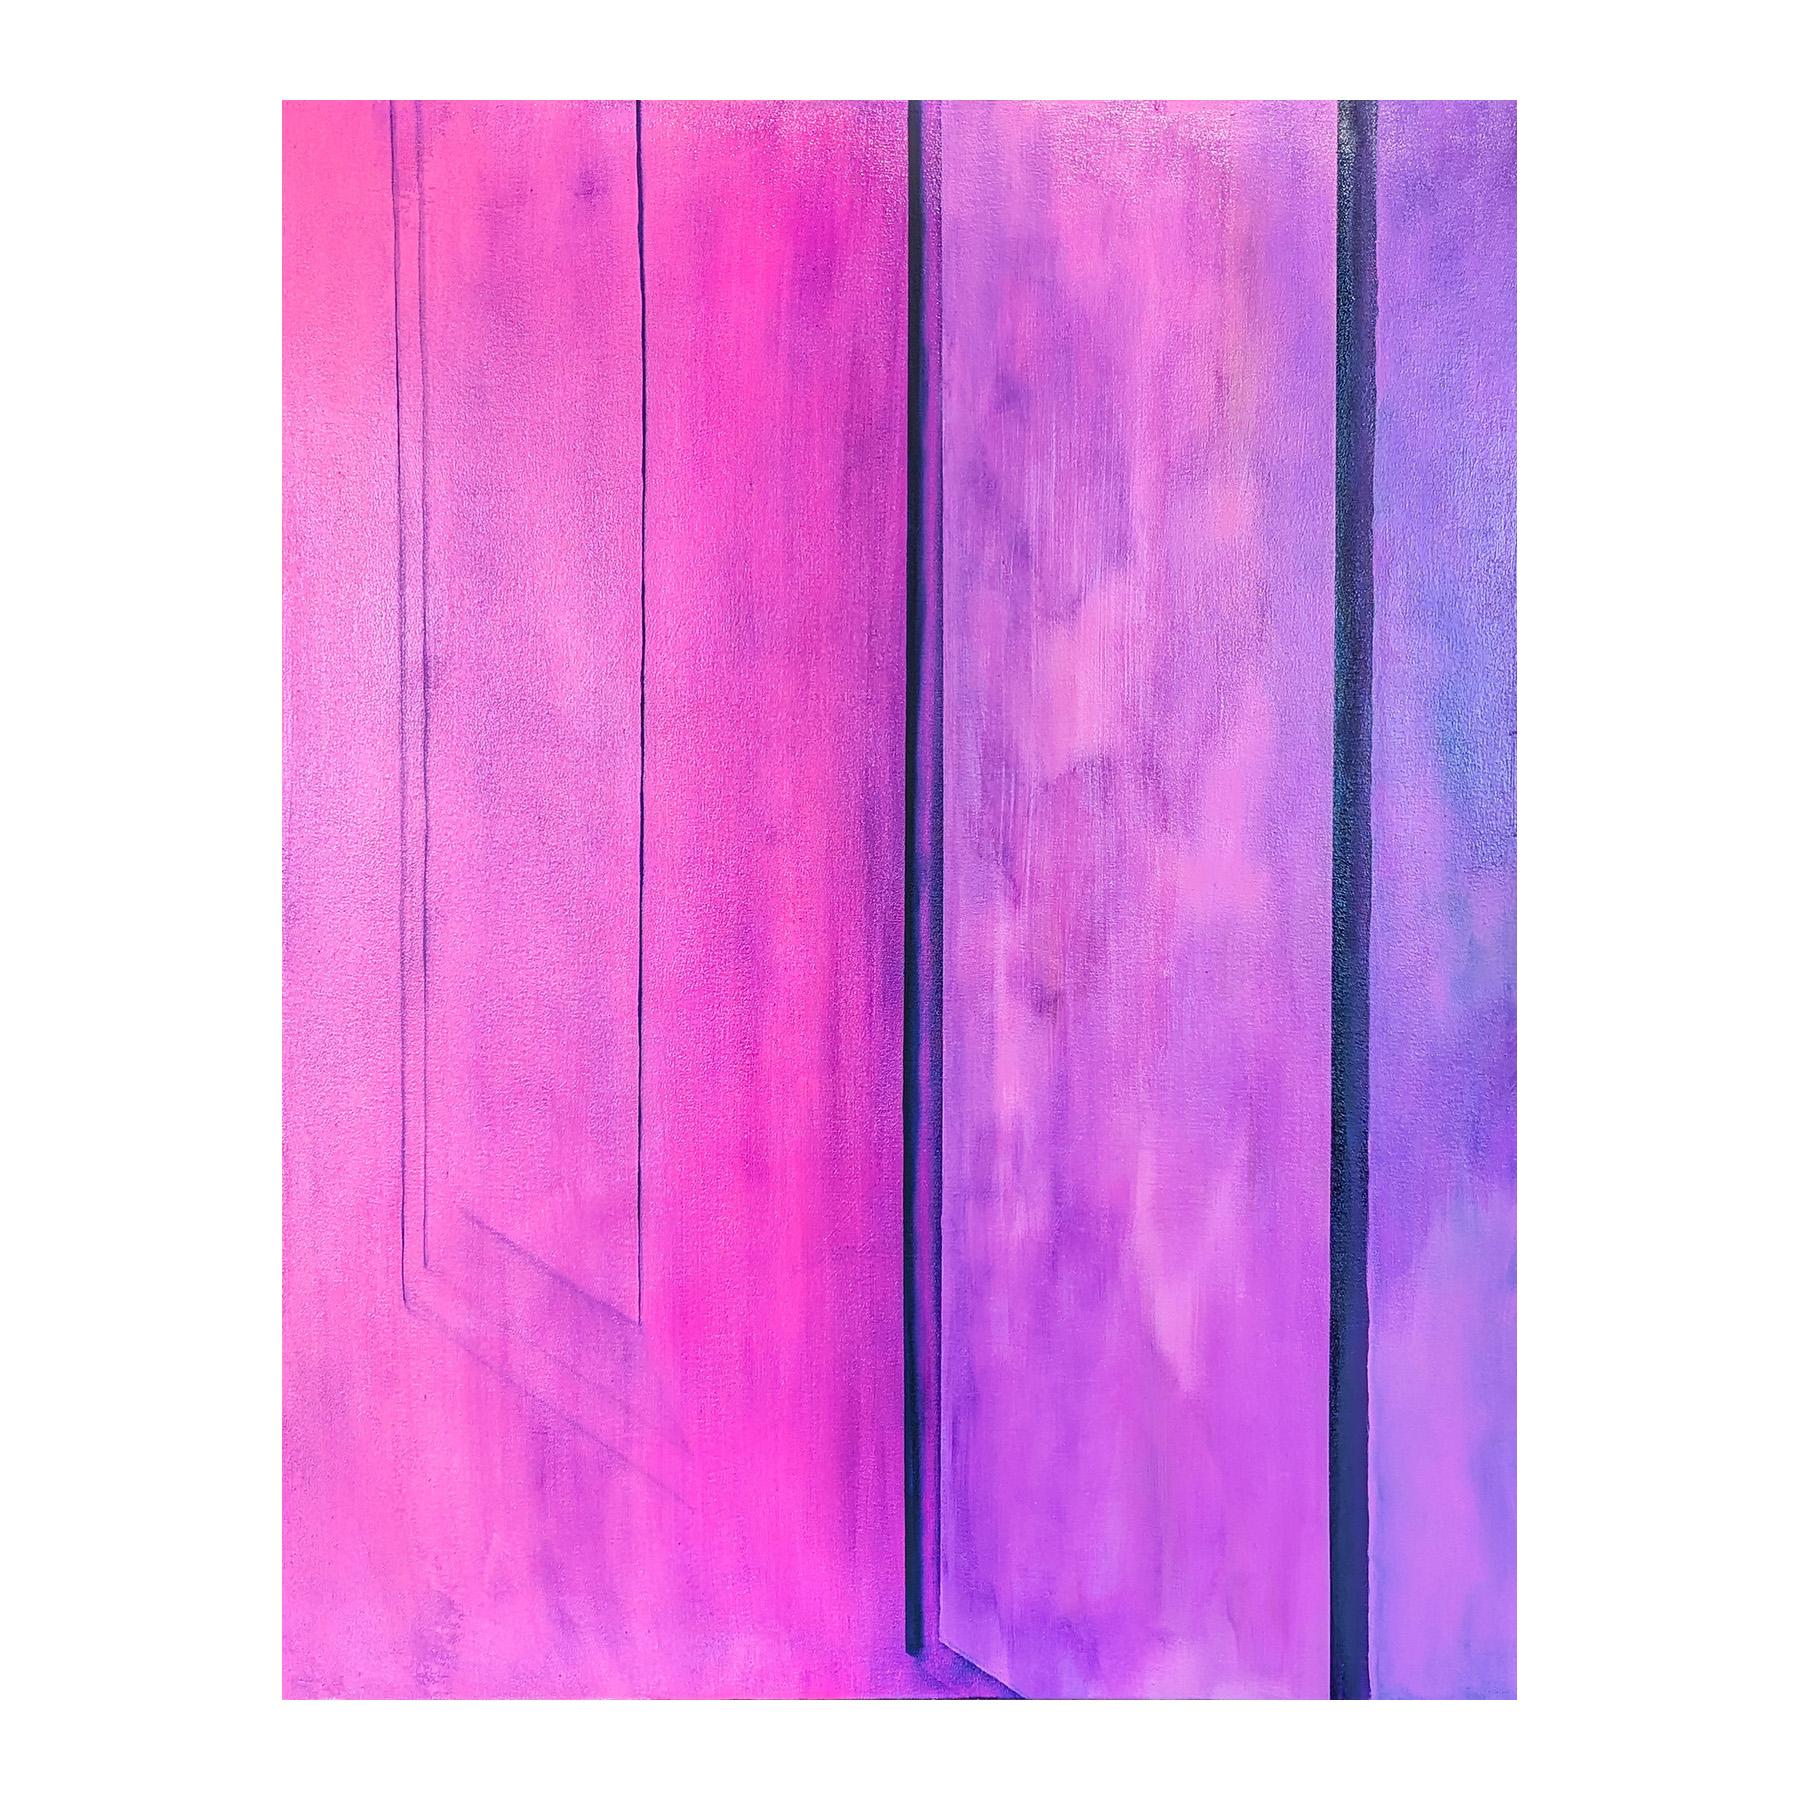 Jewel toned abstract by contemporary artist Tommy Taylor. The work features a close up of a door rendered in pink and purple tones. Signed, titled, and dated on the reverse. Currently unframed, but options are available. 

Artist Biography: Born in